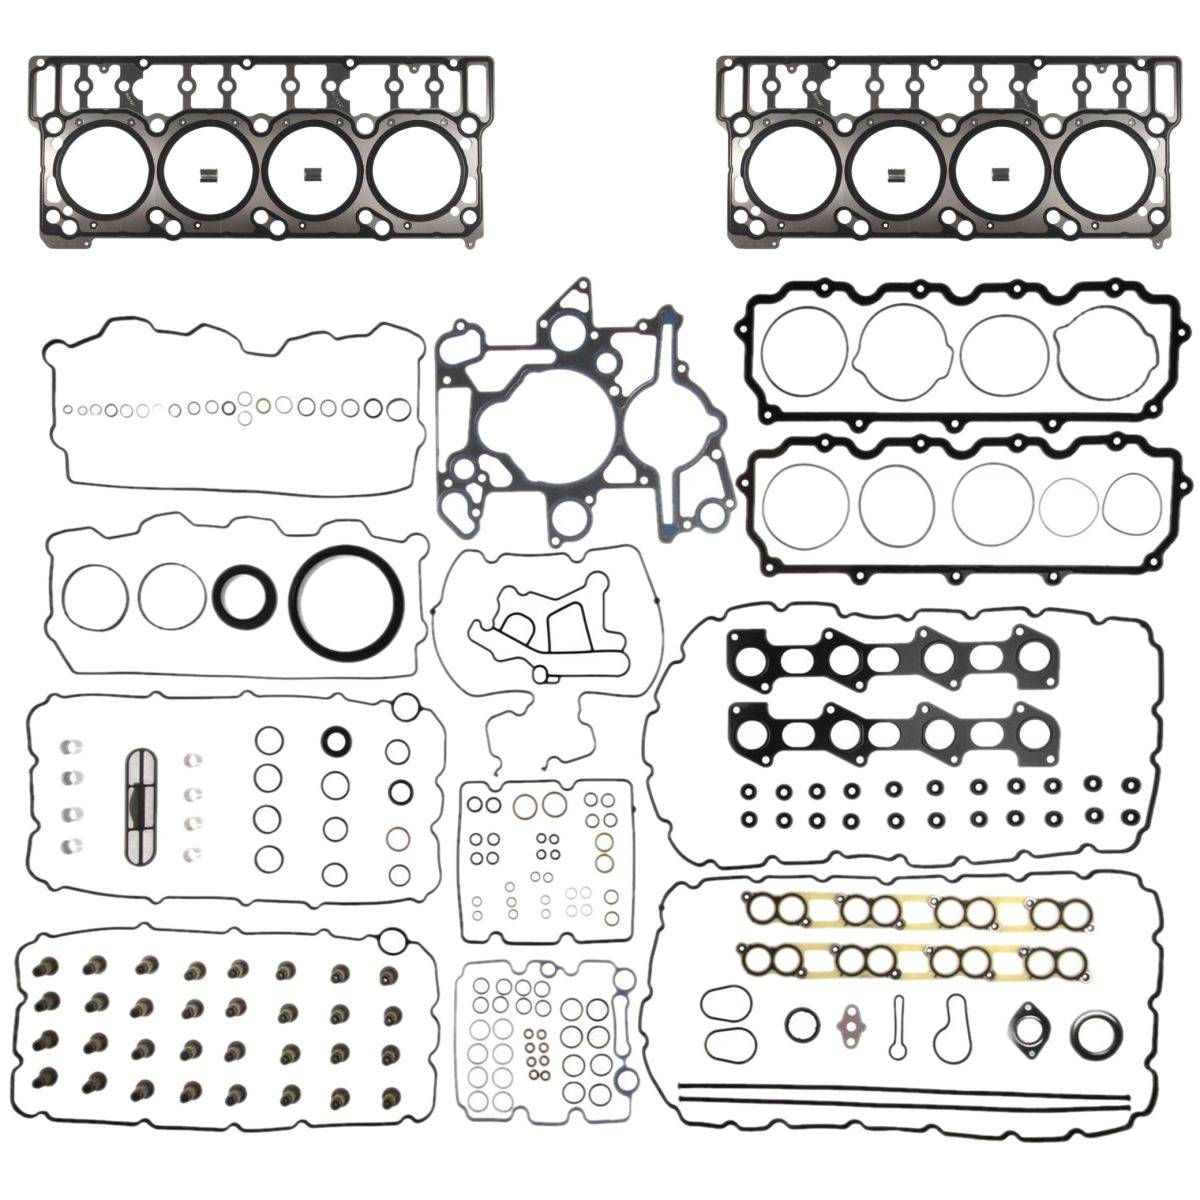 Mahle - Mahle 20MM Head Gasket Rebuild Kit For 06-07 Ford F-250/F-350 6.0L Powerstroke